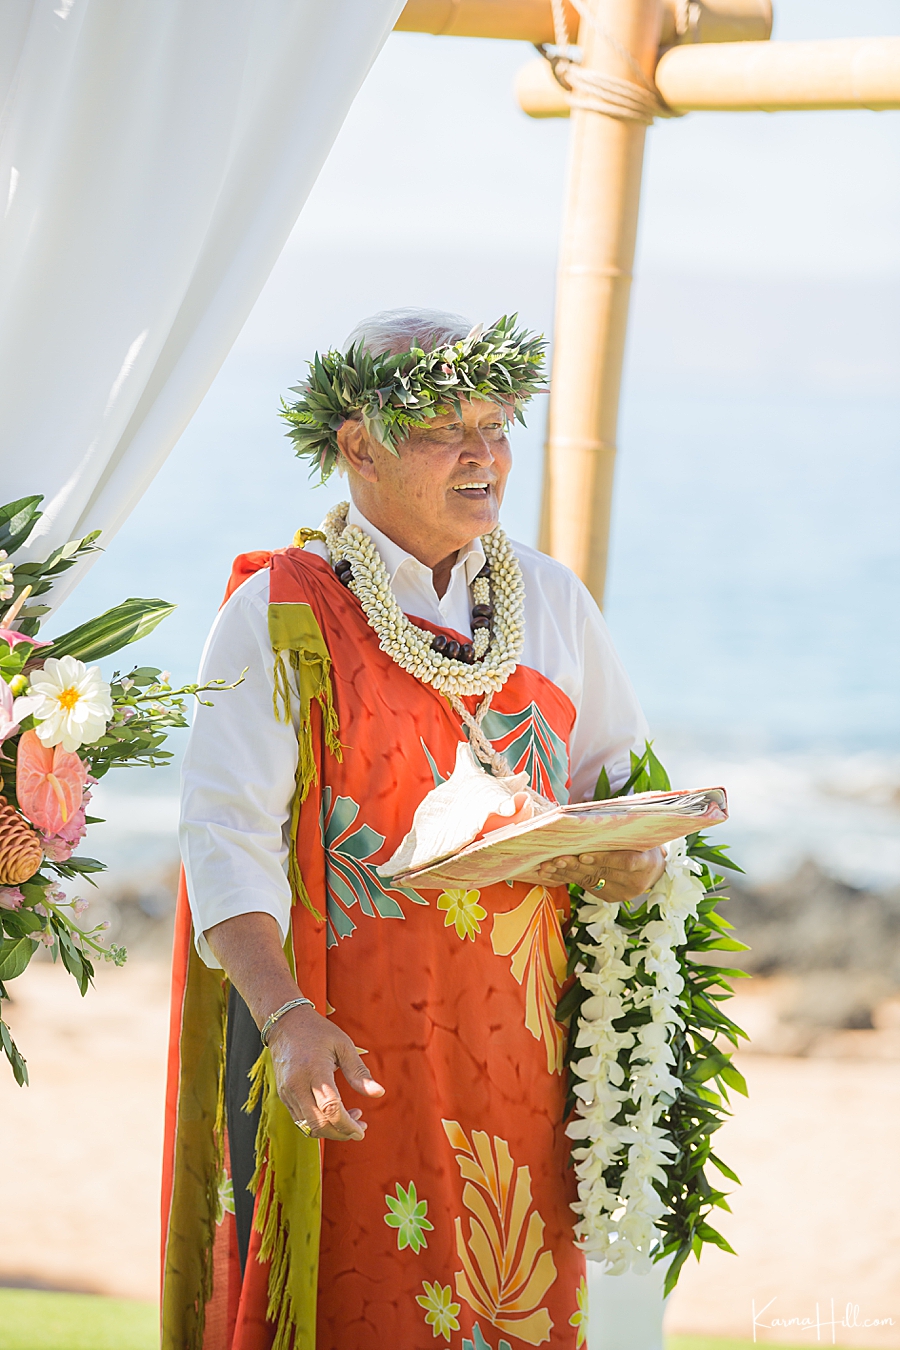 Maui ministers and Officiants
